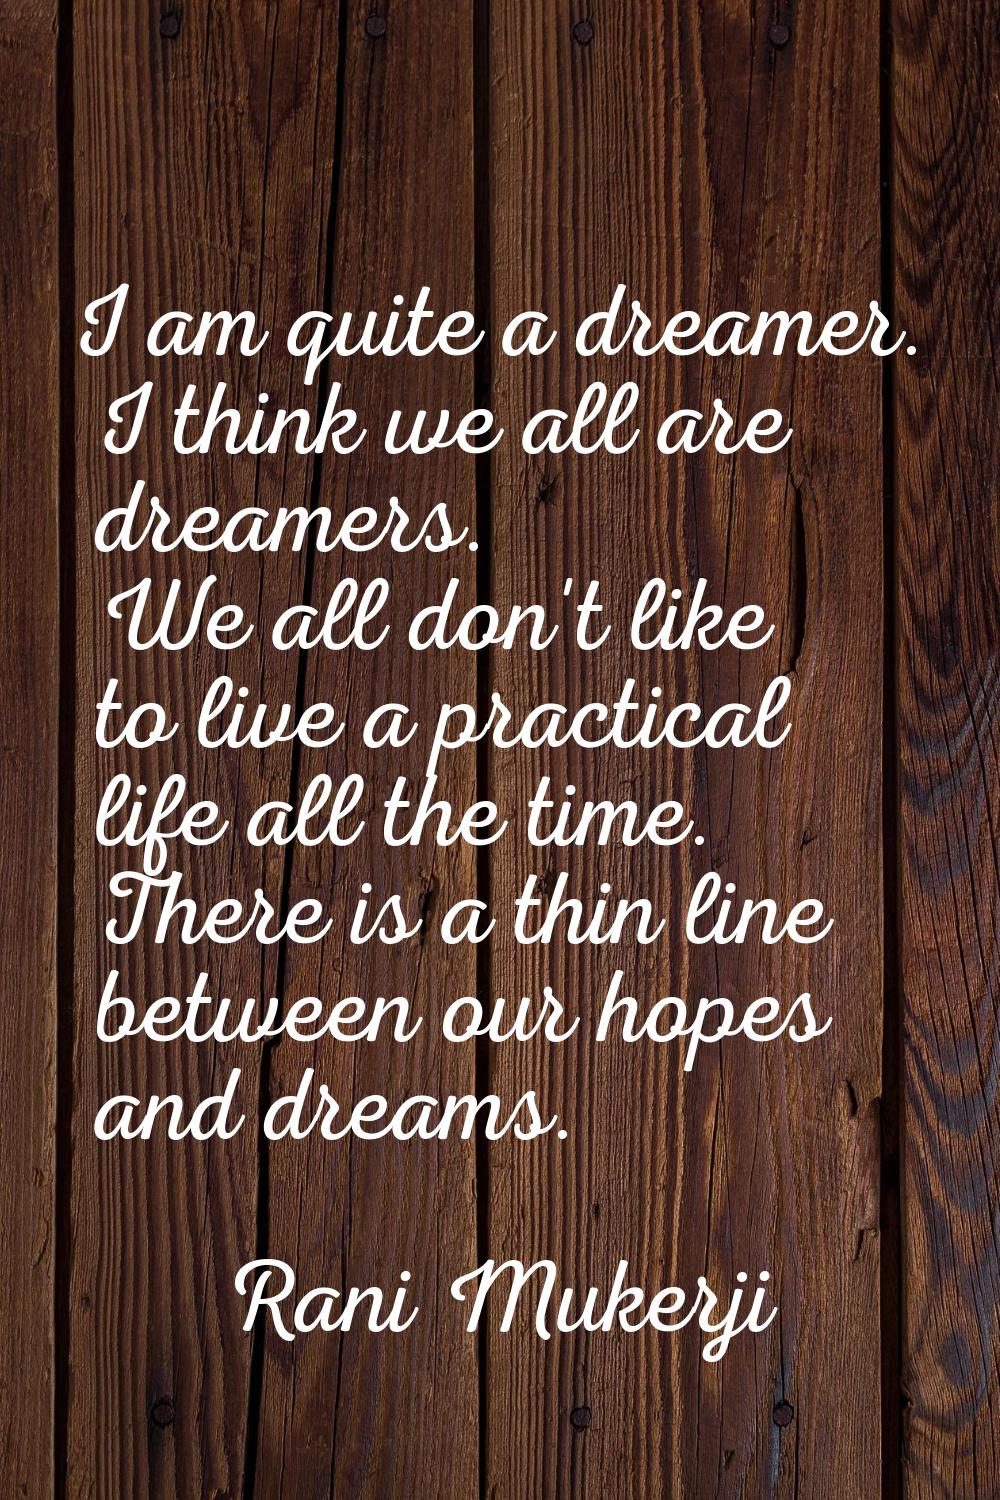 I am quite a dreamer. I think we all are dreamers. We all don't like to live a practical life all t